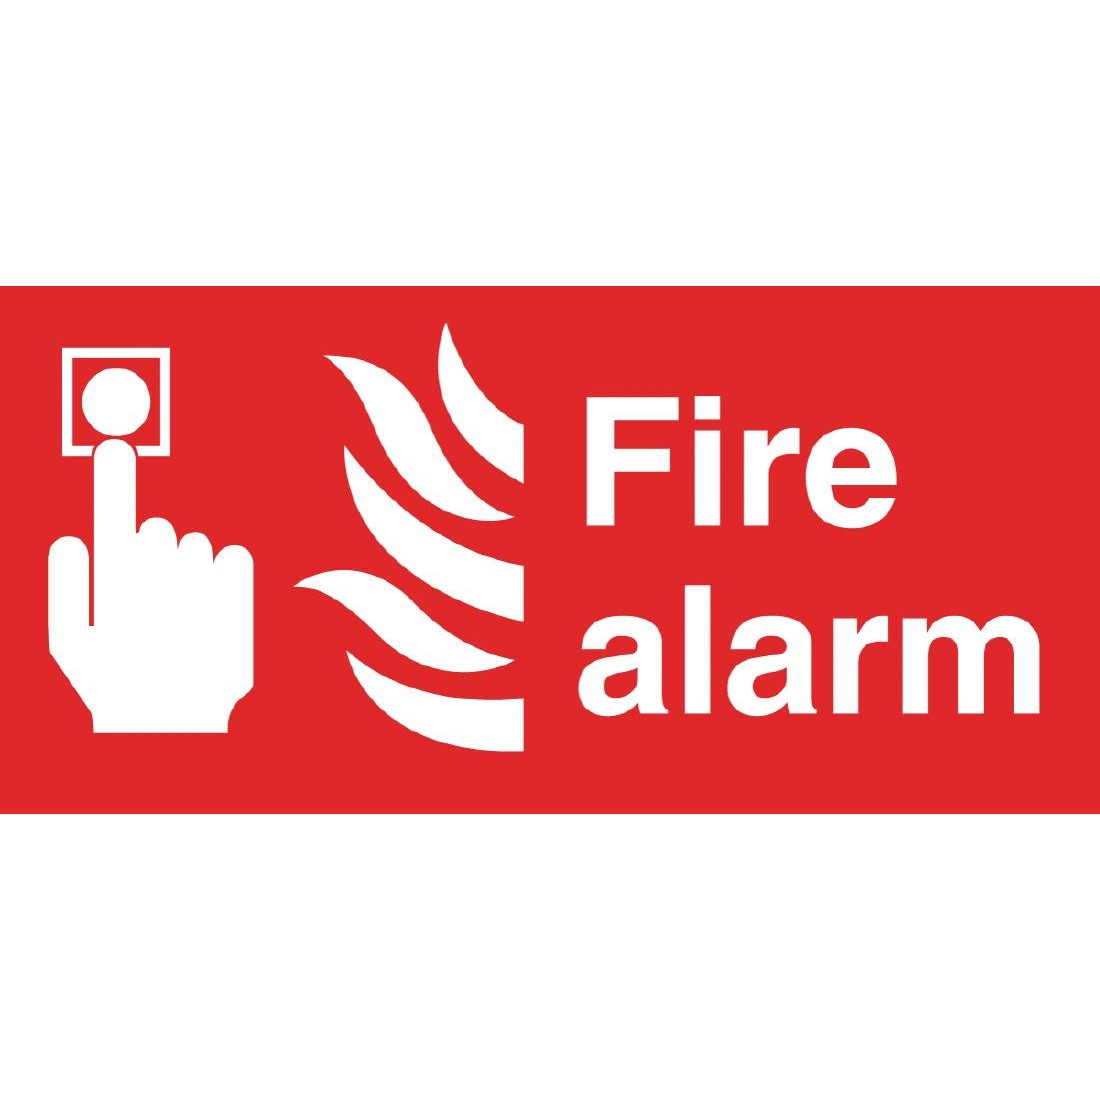 fire alarm safety sign